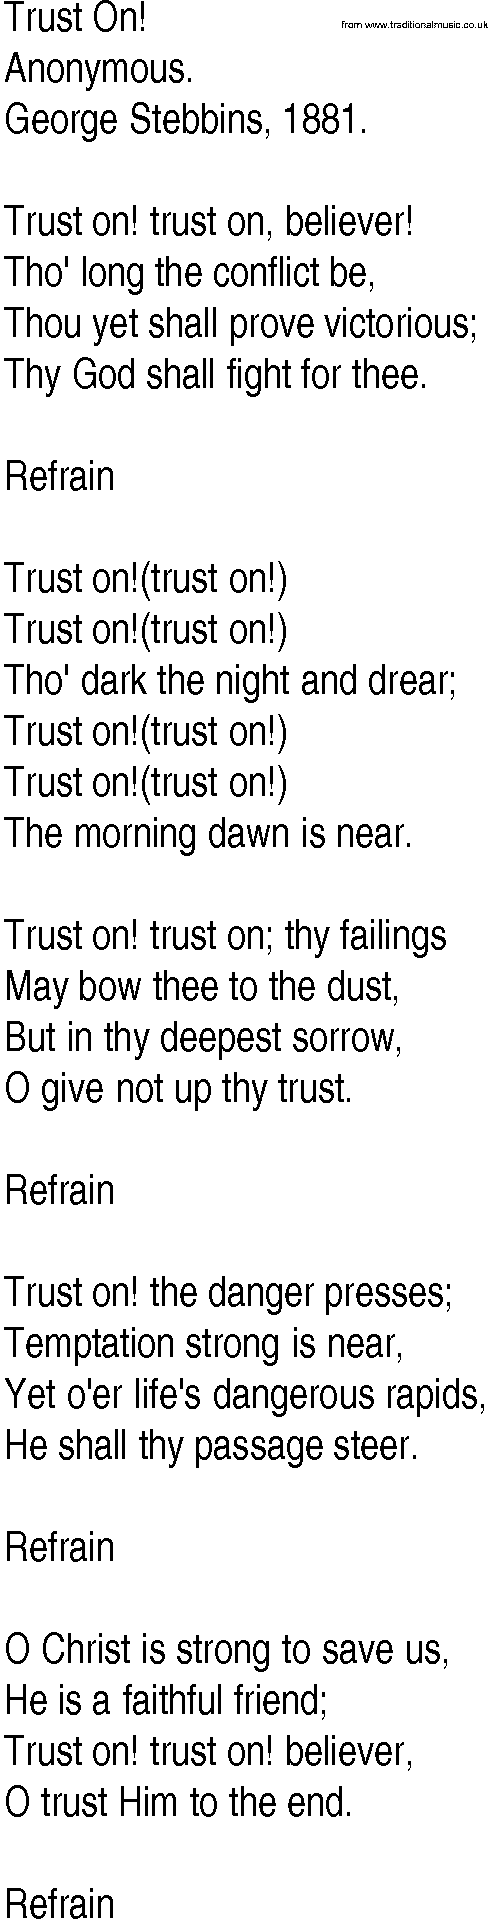 Hymn and Gospel Song: Trust On! by Anonymous lyrics